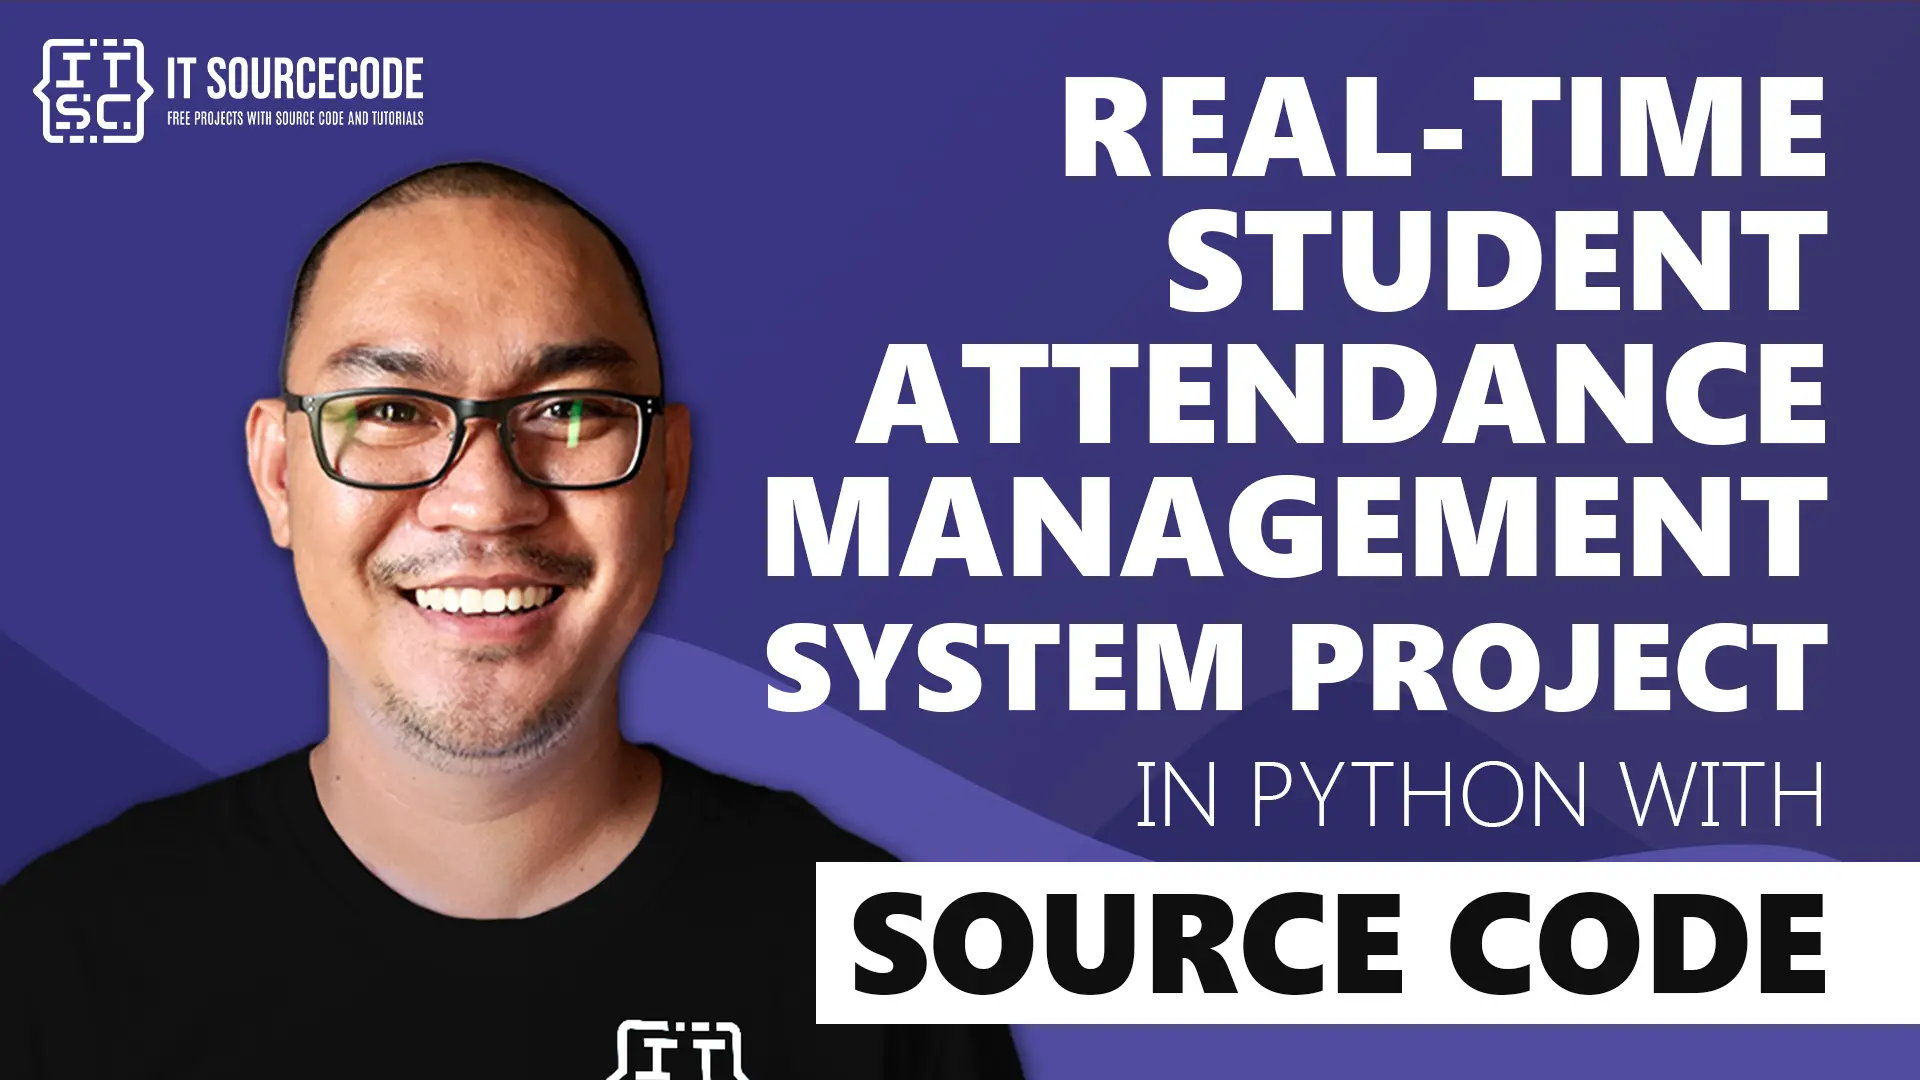 Student Attendance Management System Project In Python With Source Code